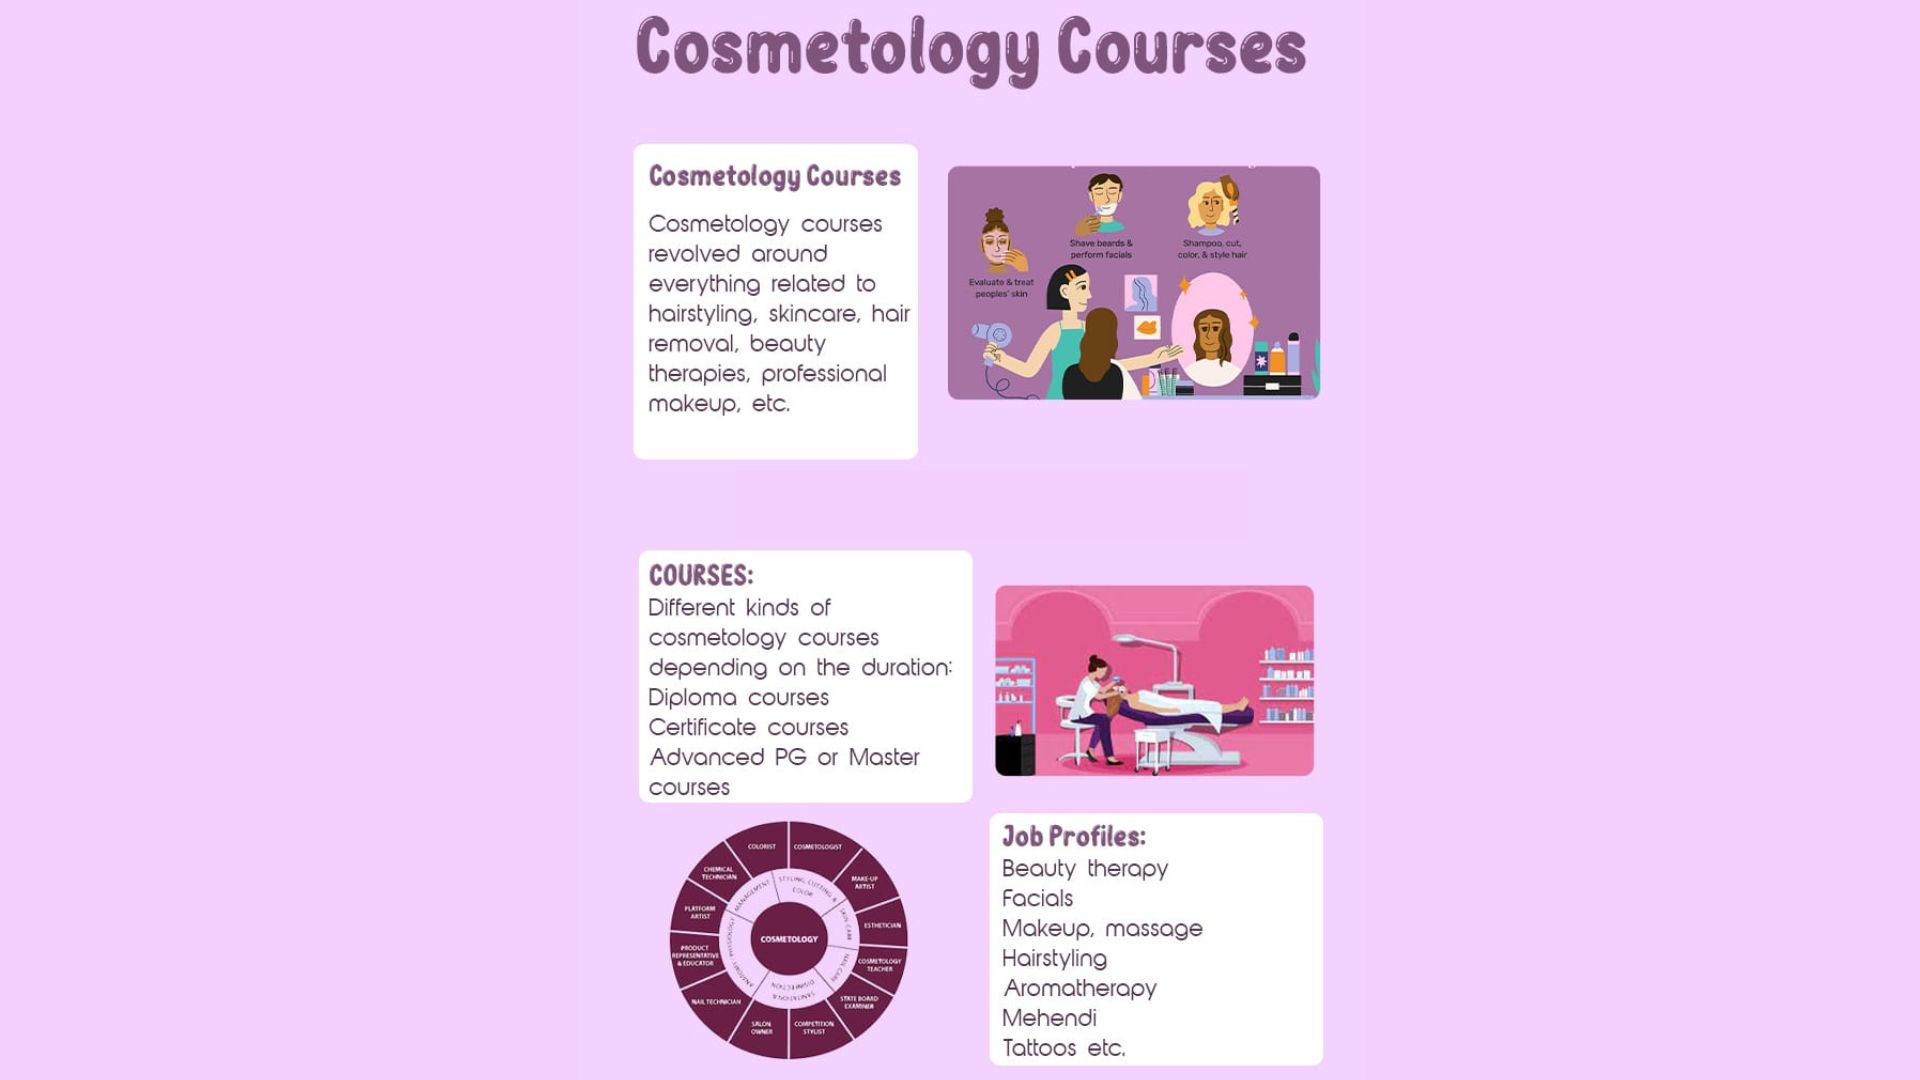 About Cosmetology